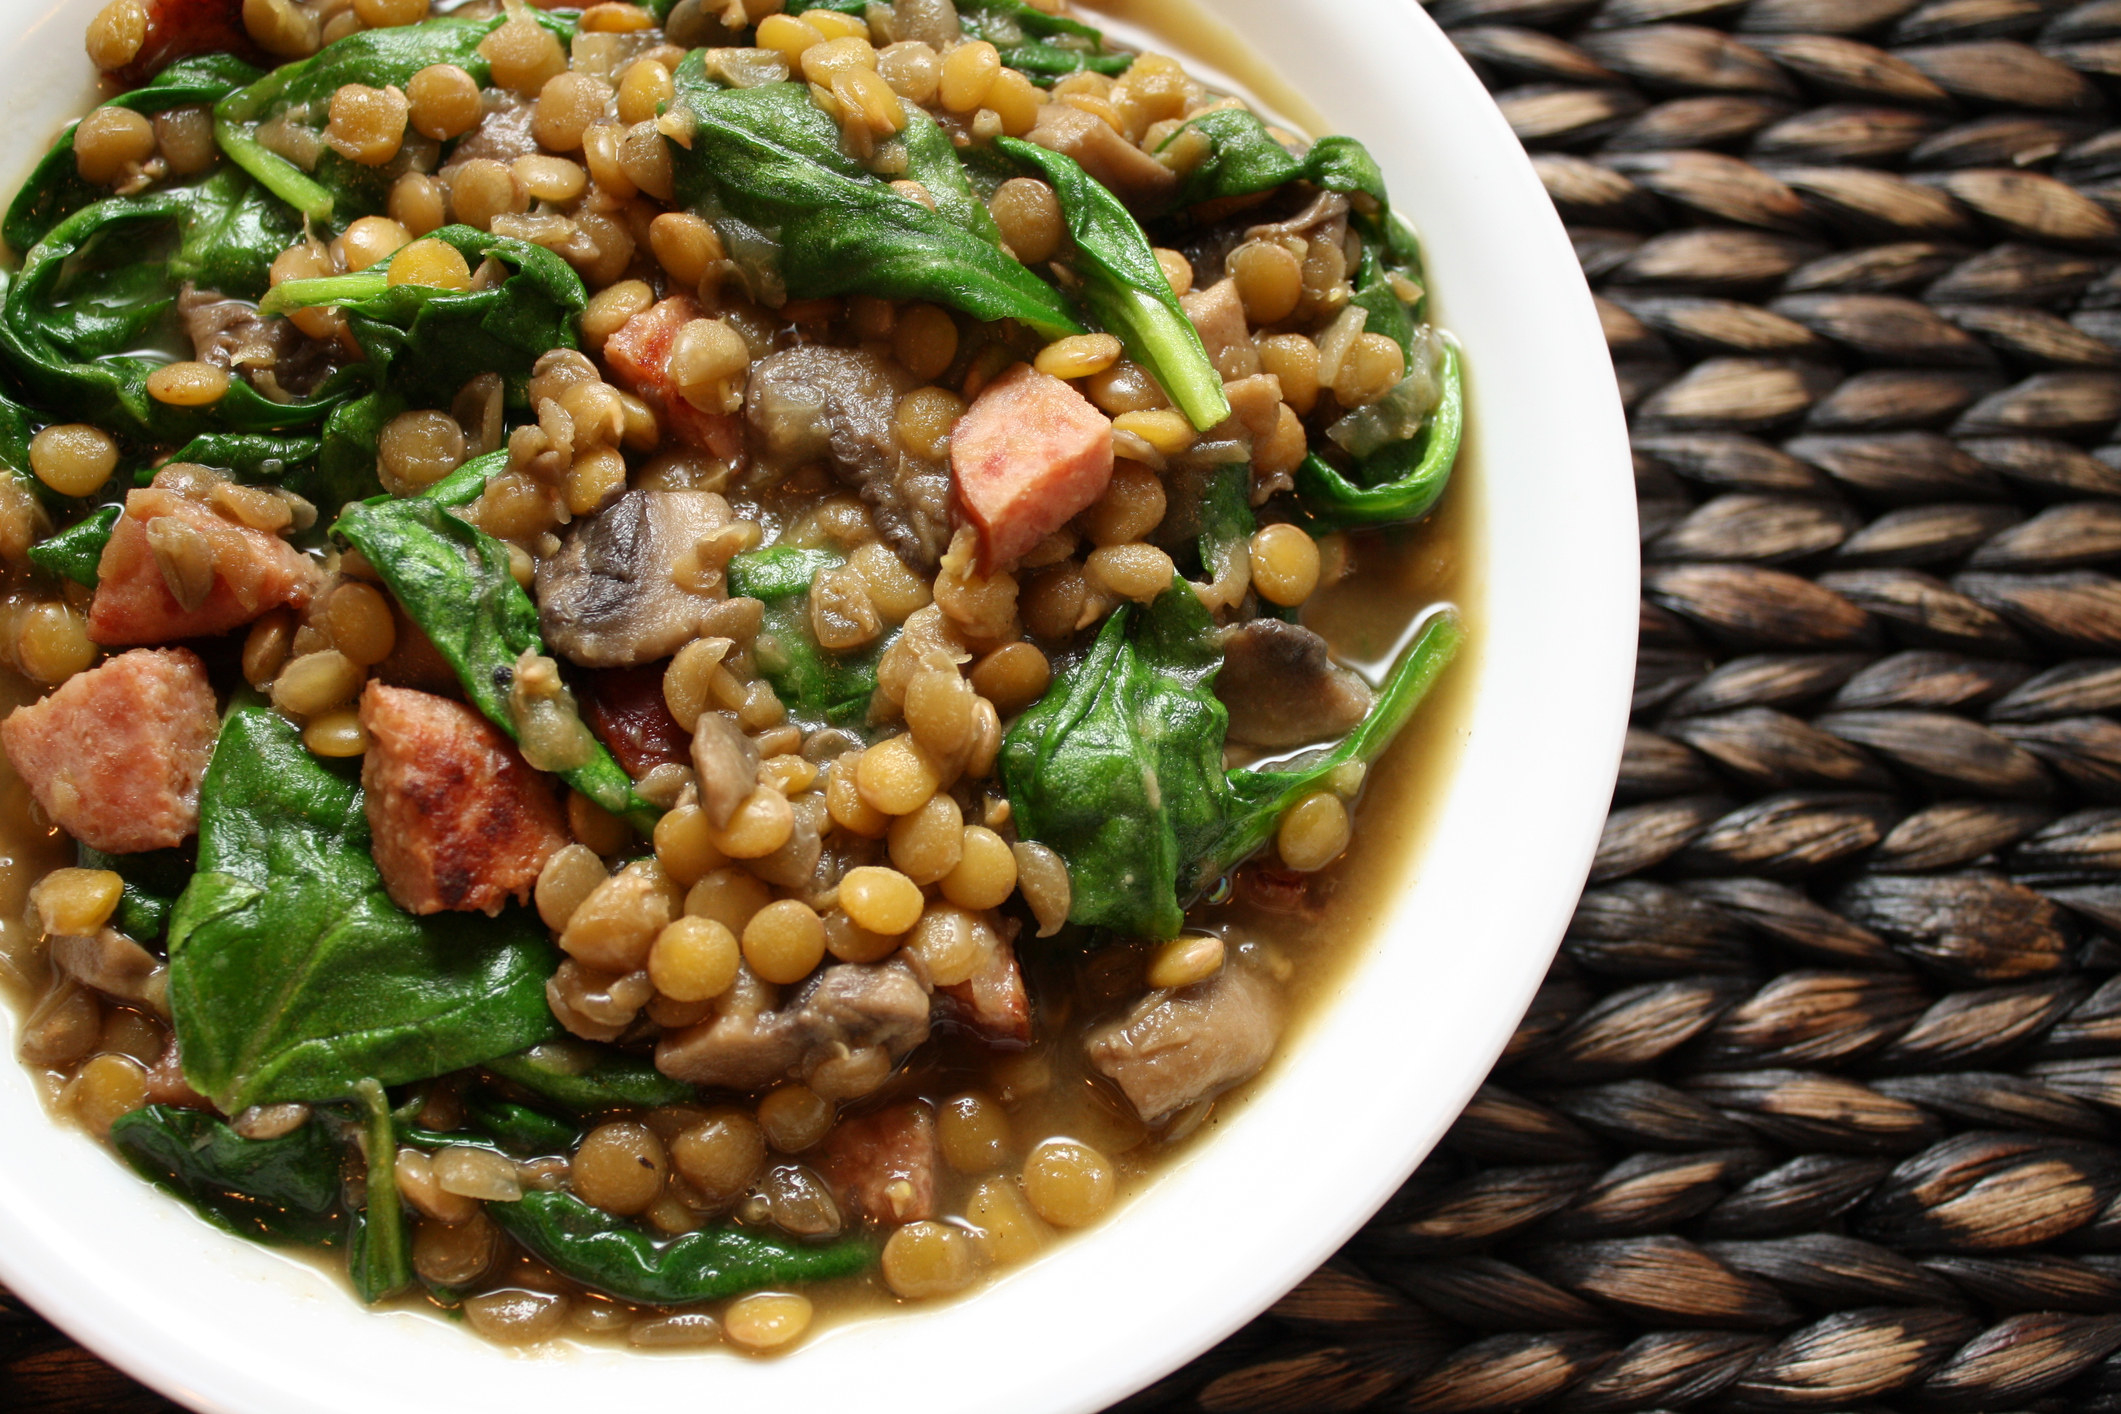 Lentil stew with vegetables and meat